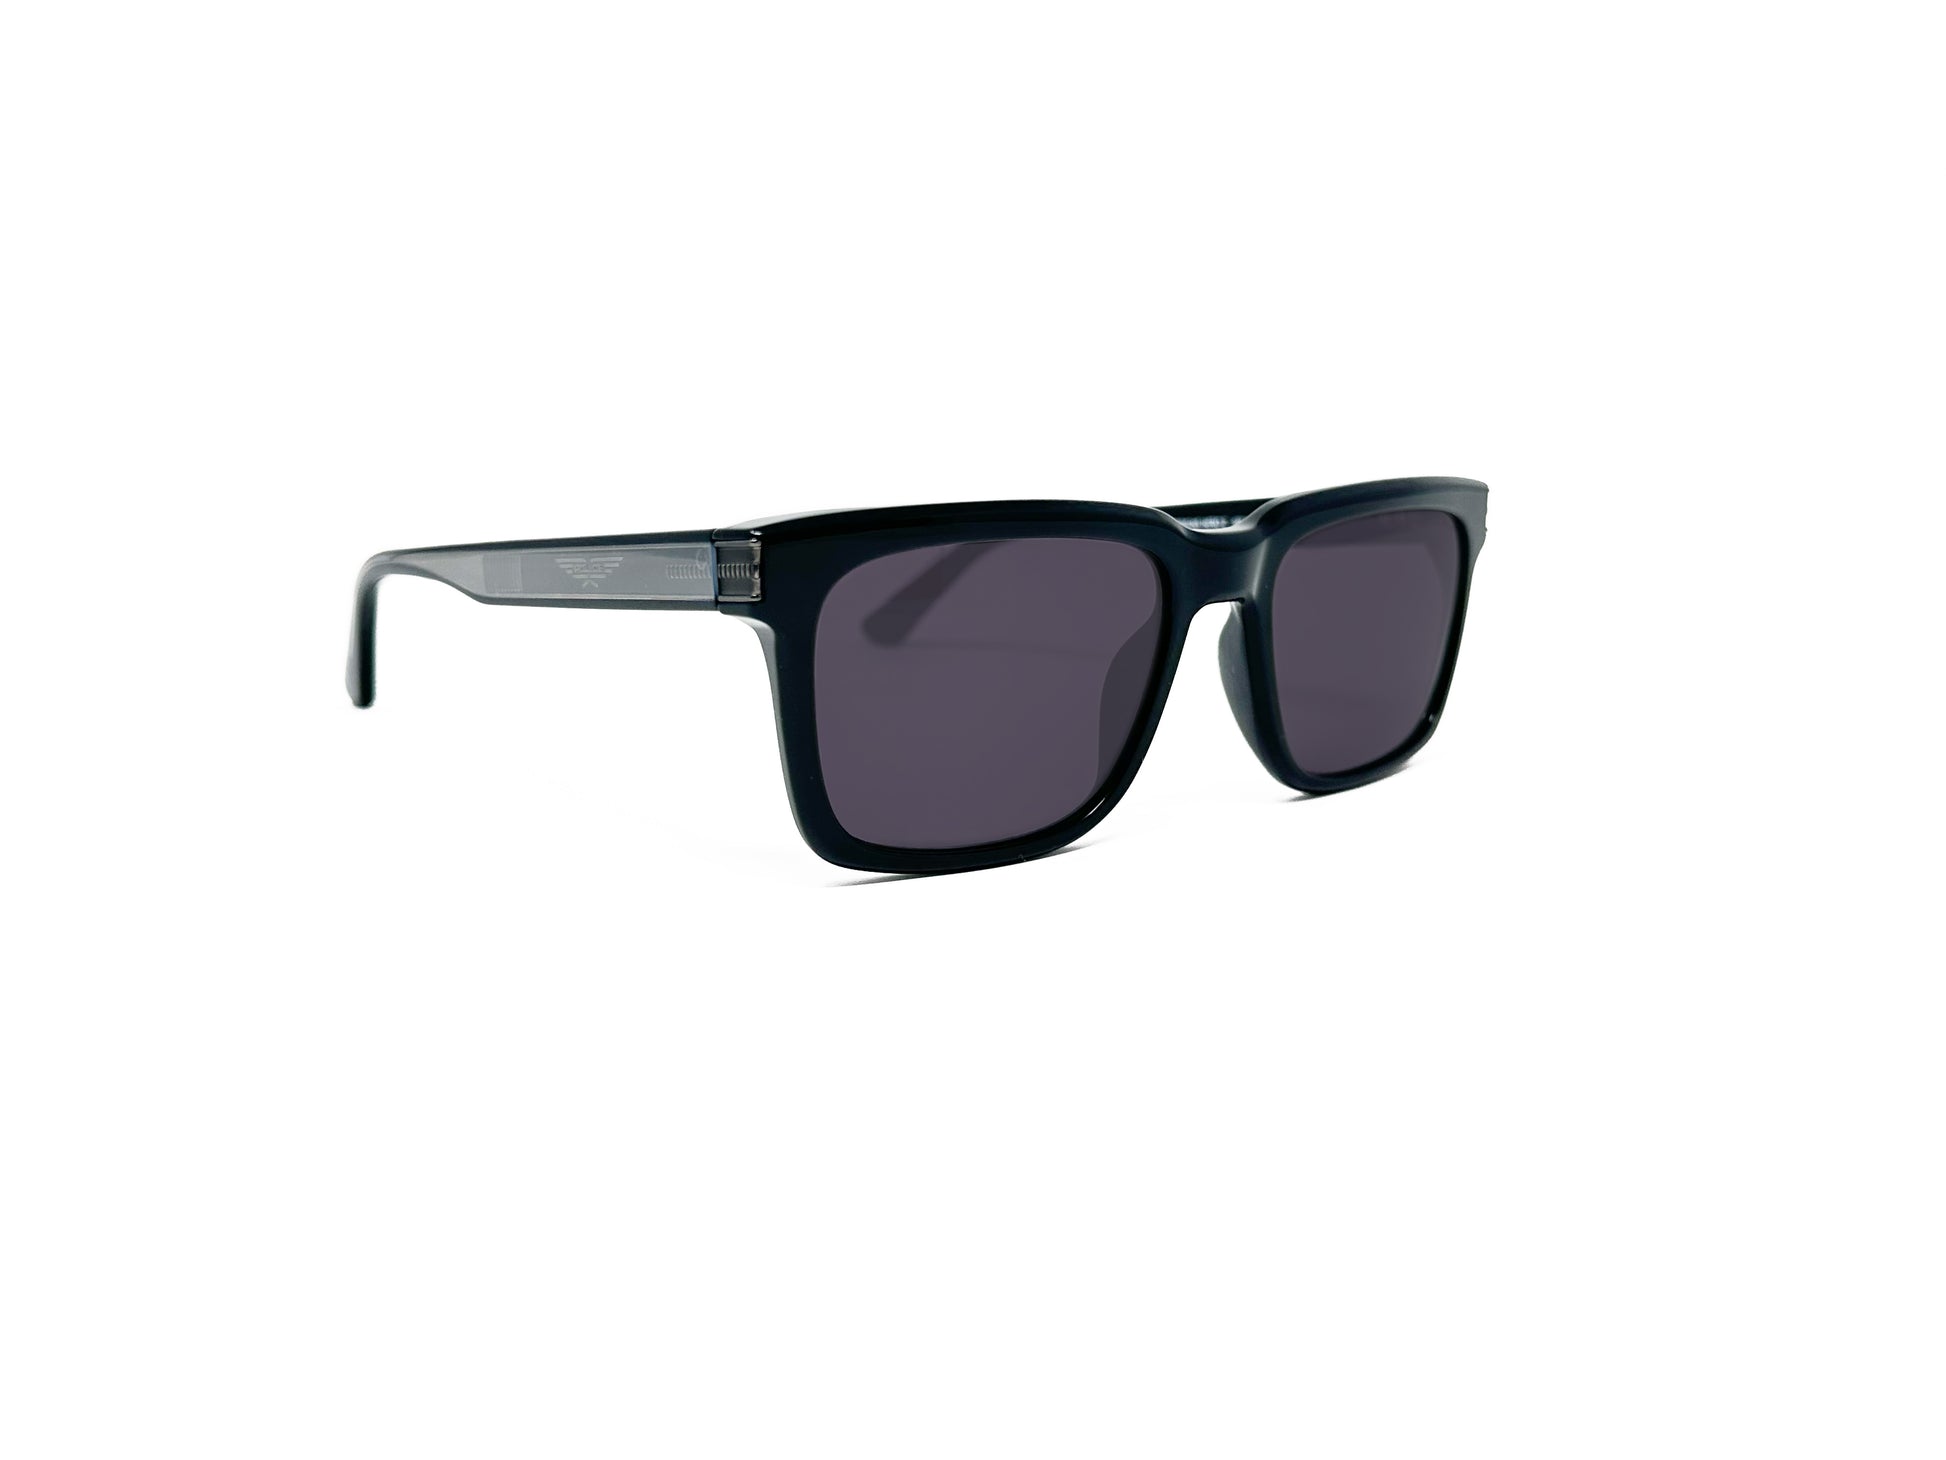 Police square acetate sunglass with bevel on top of frame. Model: SPLF12 - Origins Hero 2. Color: 0700 - Glossy Black. Side view.